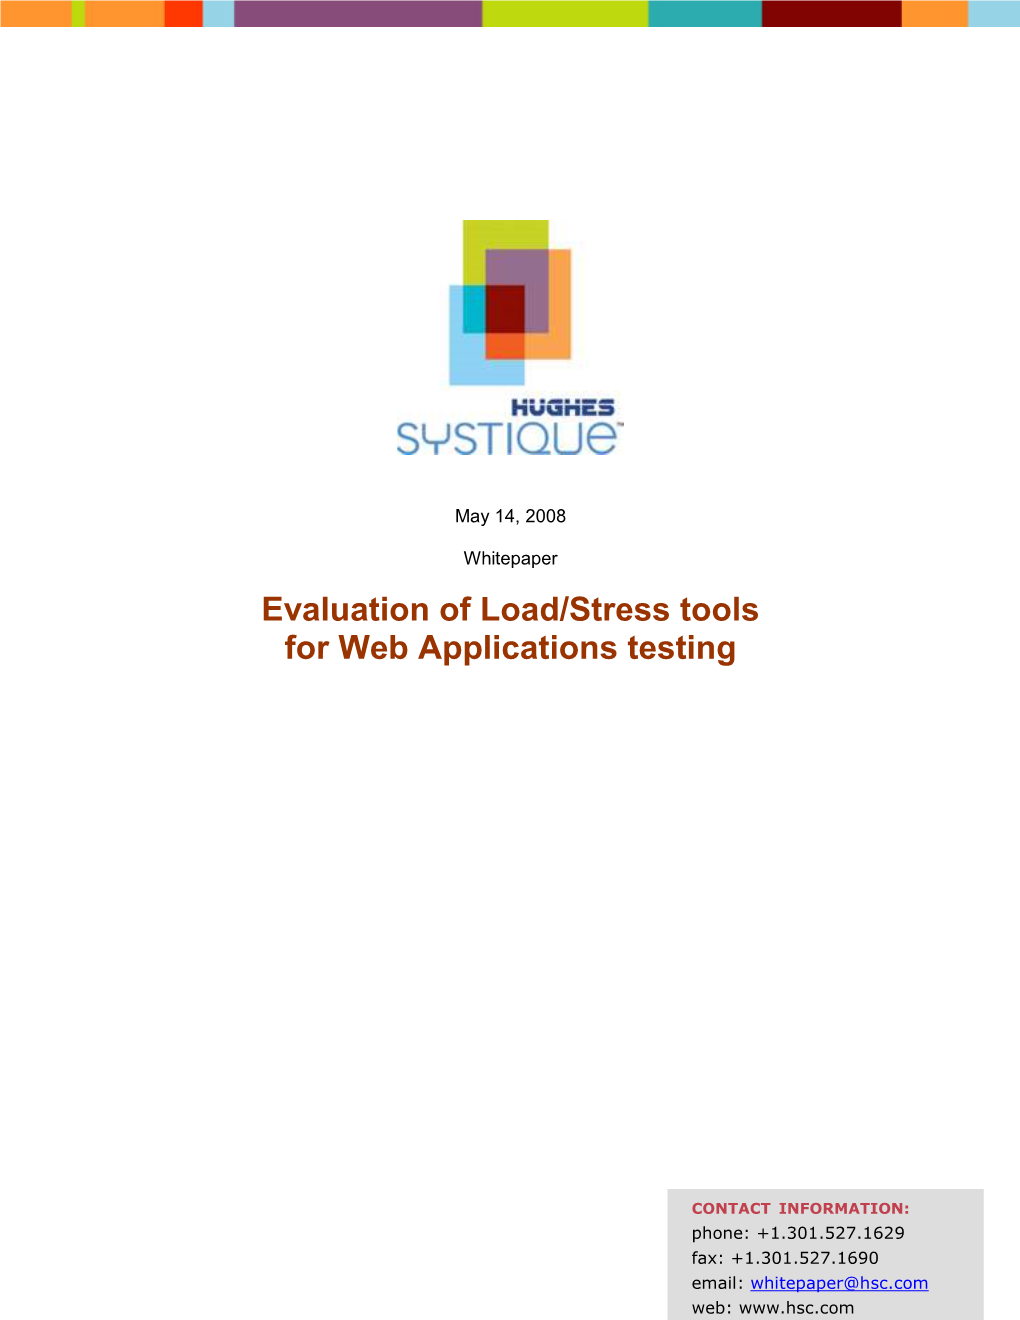 Evaluation of Load/Stress Tools for Web Applications Testing